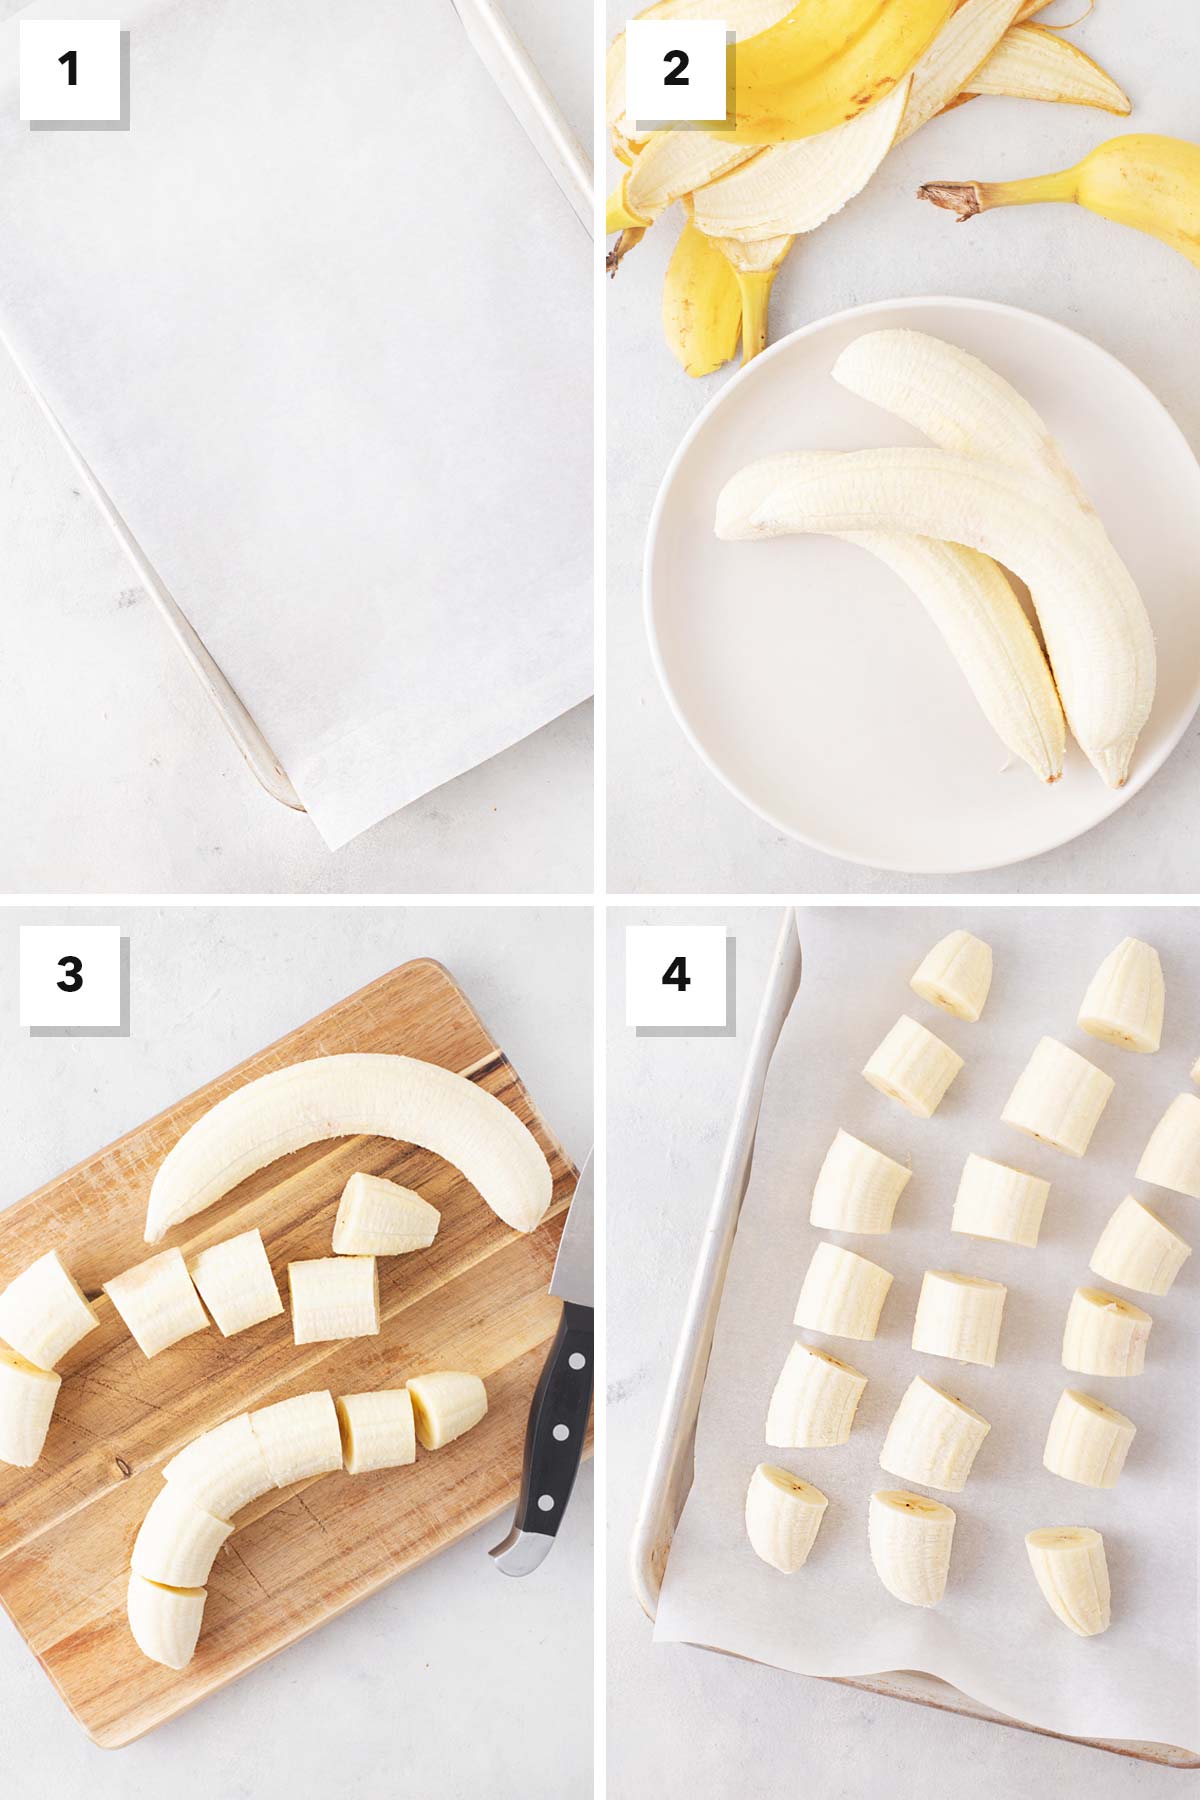 Steps for freezing bananas for smoothies.